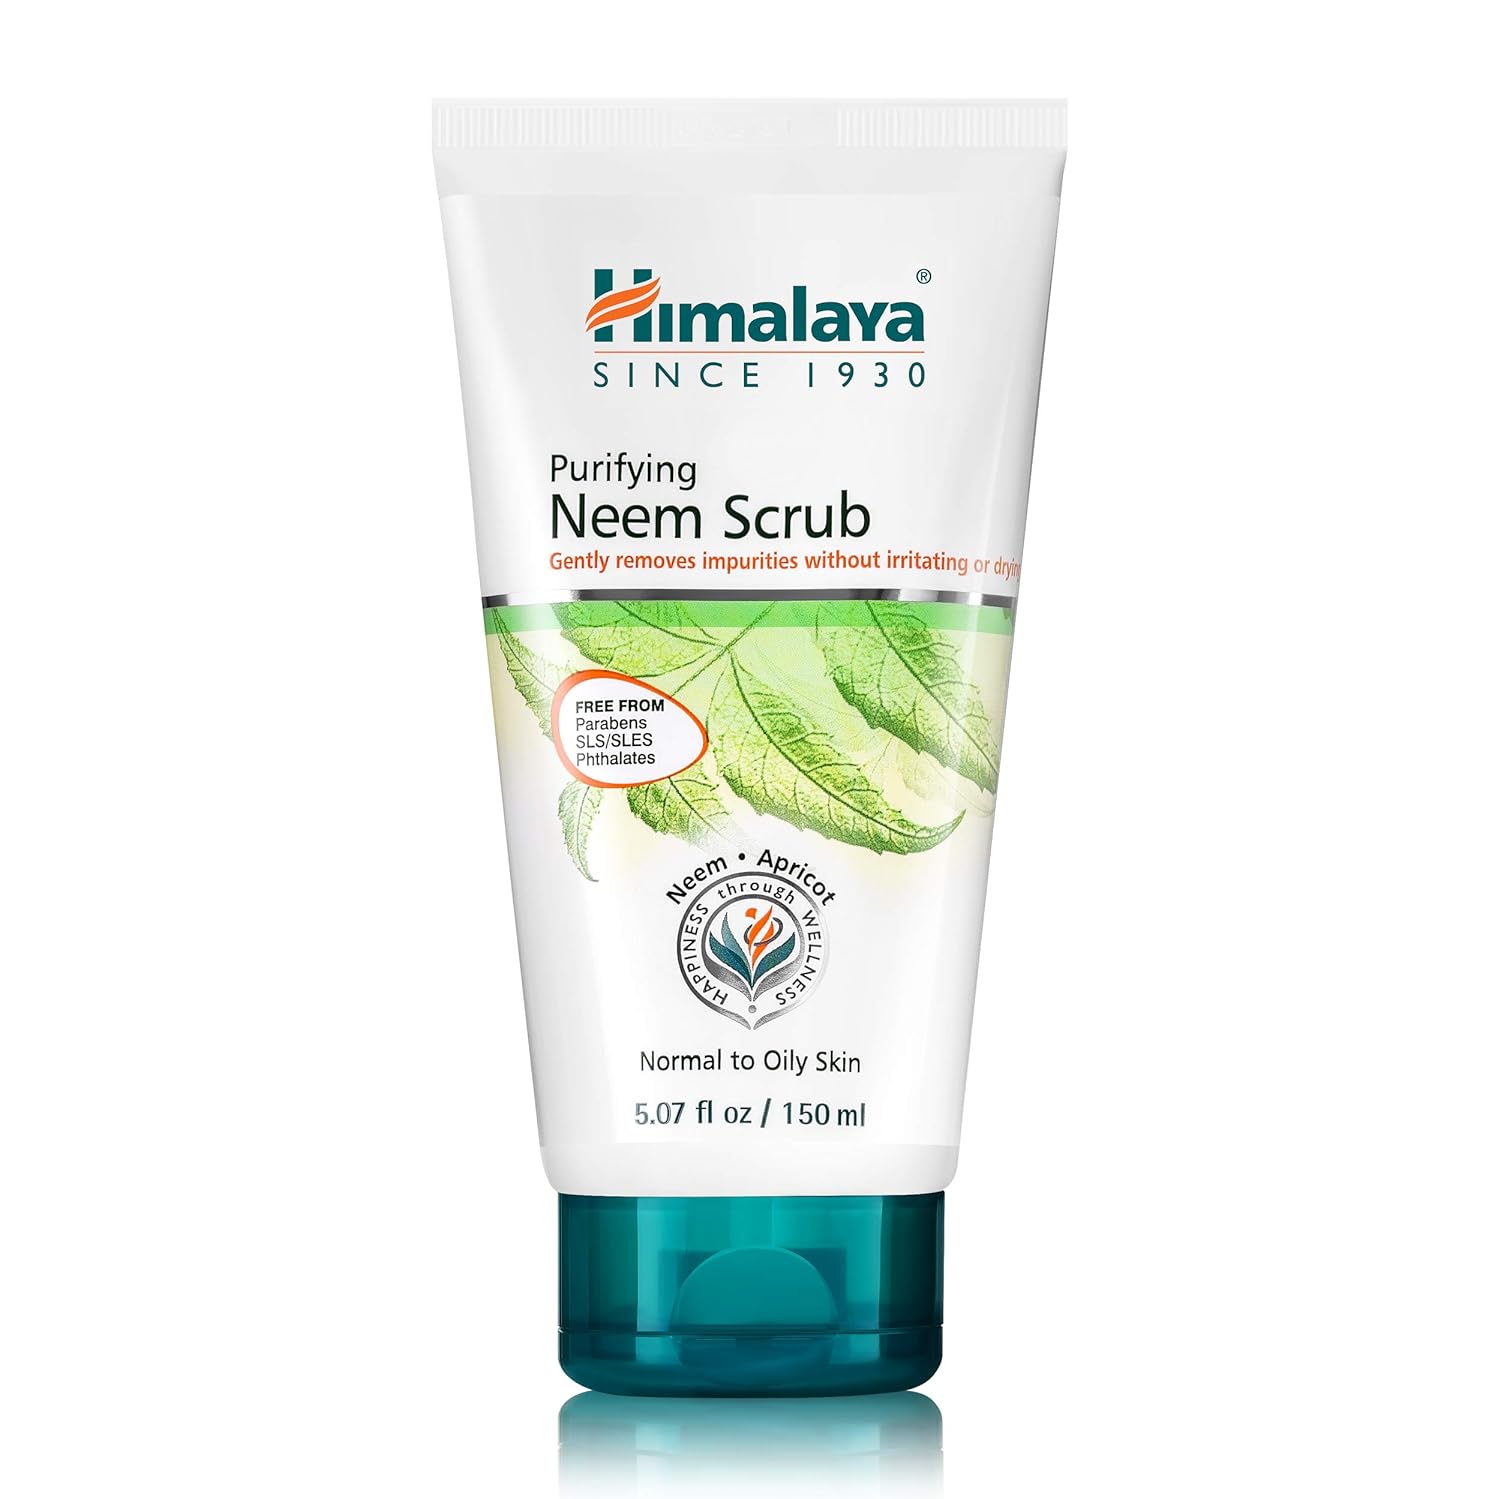 Himalaya Purifying Neem Scrub for a Deep Clean to Reduce Acne and Remove Dead Skin, 5.07